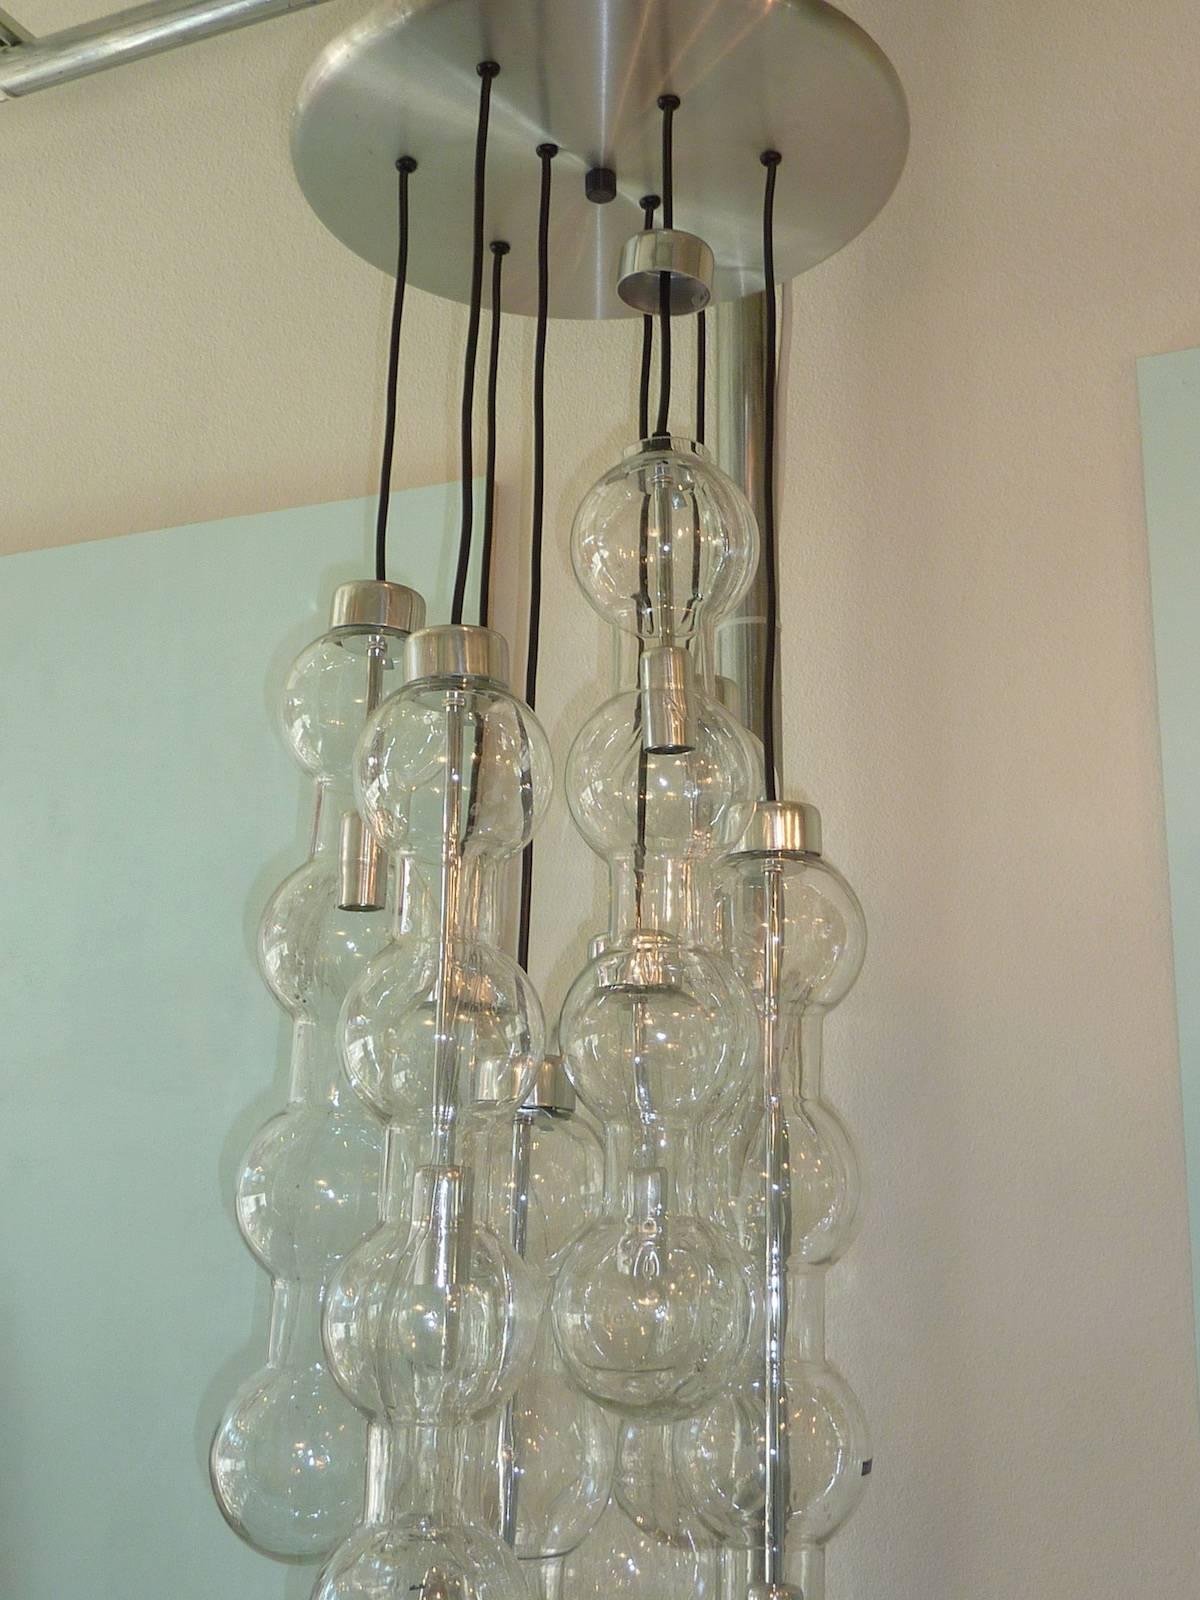 A 1960s Doria modern glass chandelier with eight cascading bubble strands. Strands feature original Doria brand stickers. Discovered at private sale in Germany. One previous owner. This item will move quickly . It has original vintage Euro wiring.